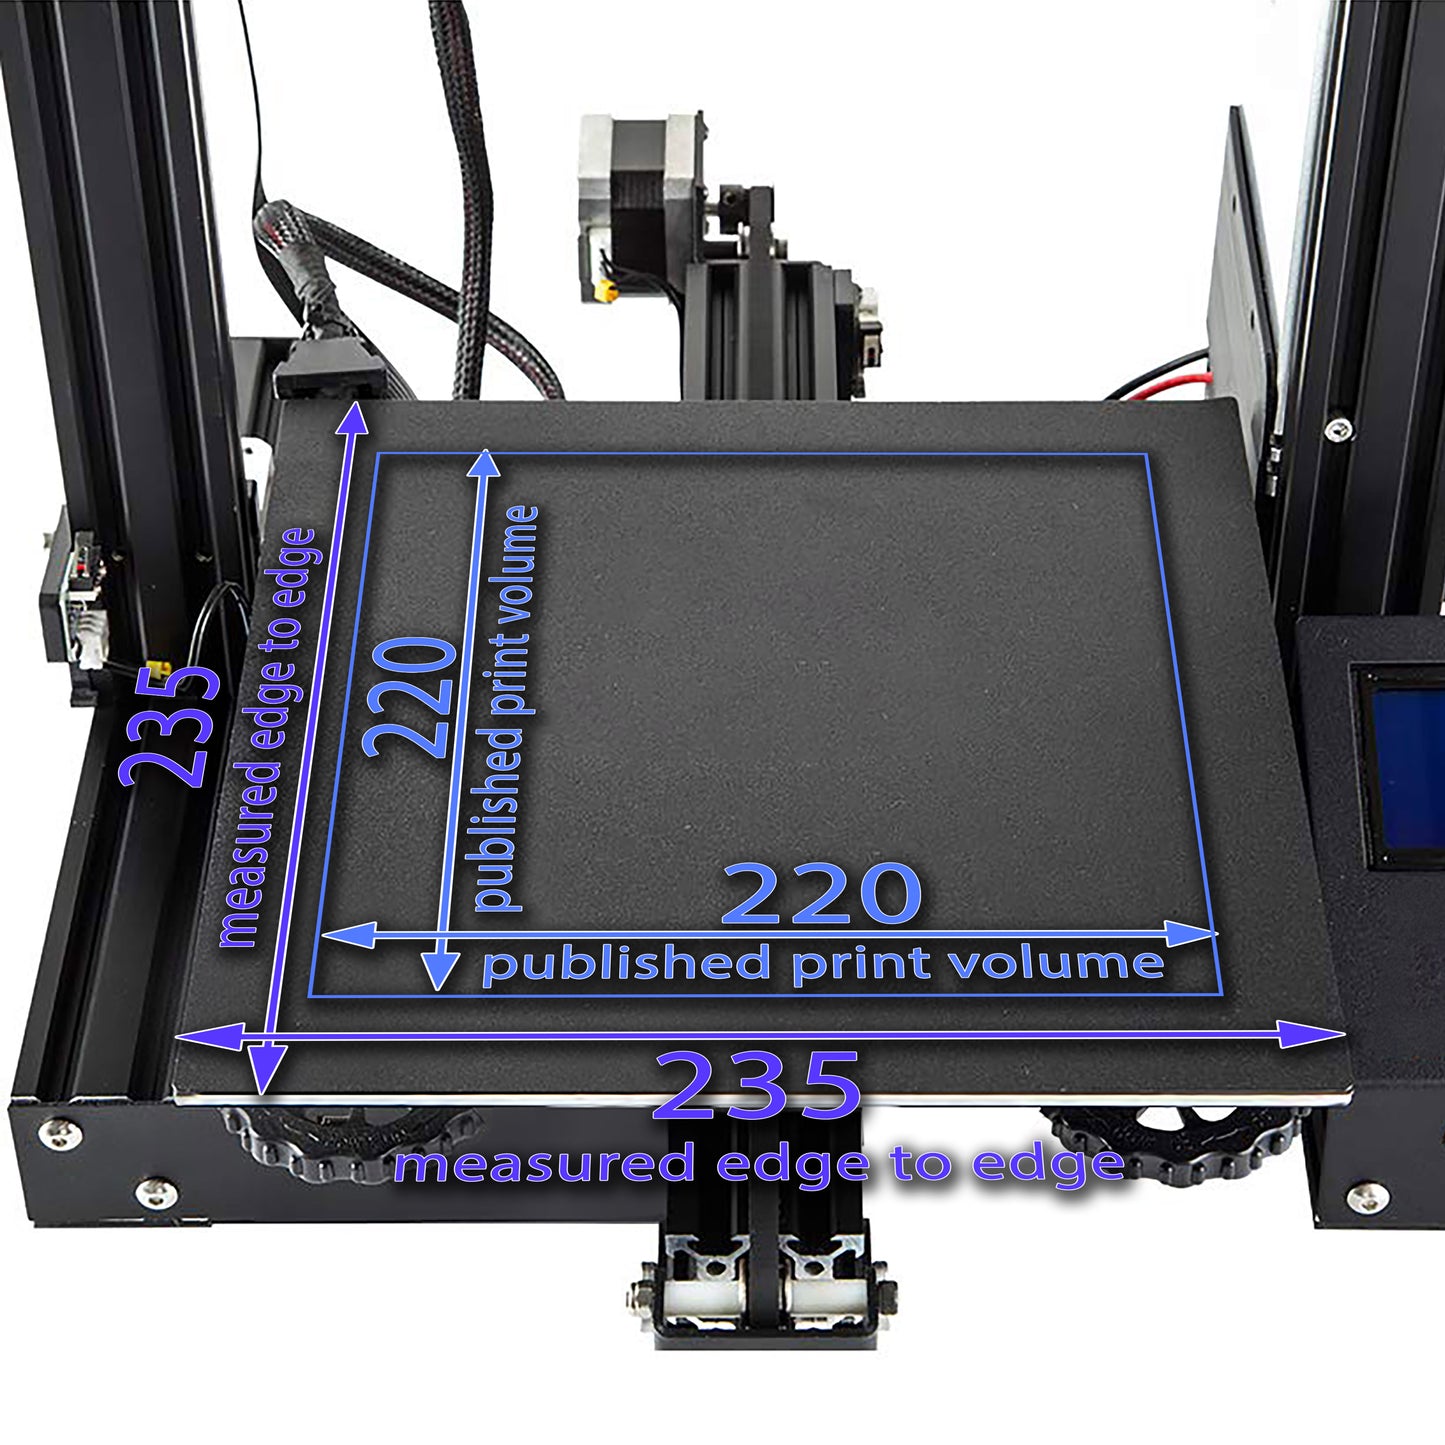 PEI Build Surface - 258 x 230 - Ultimaker S2/S2+/S3 and Eryone ER